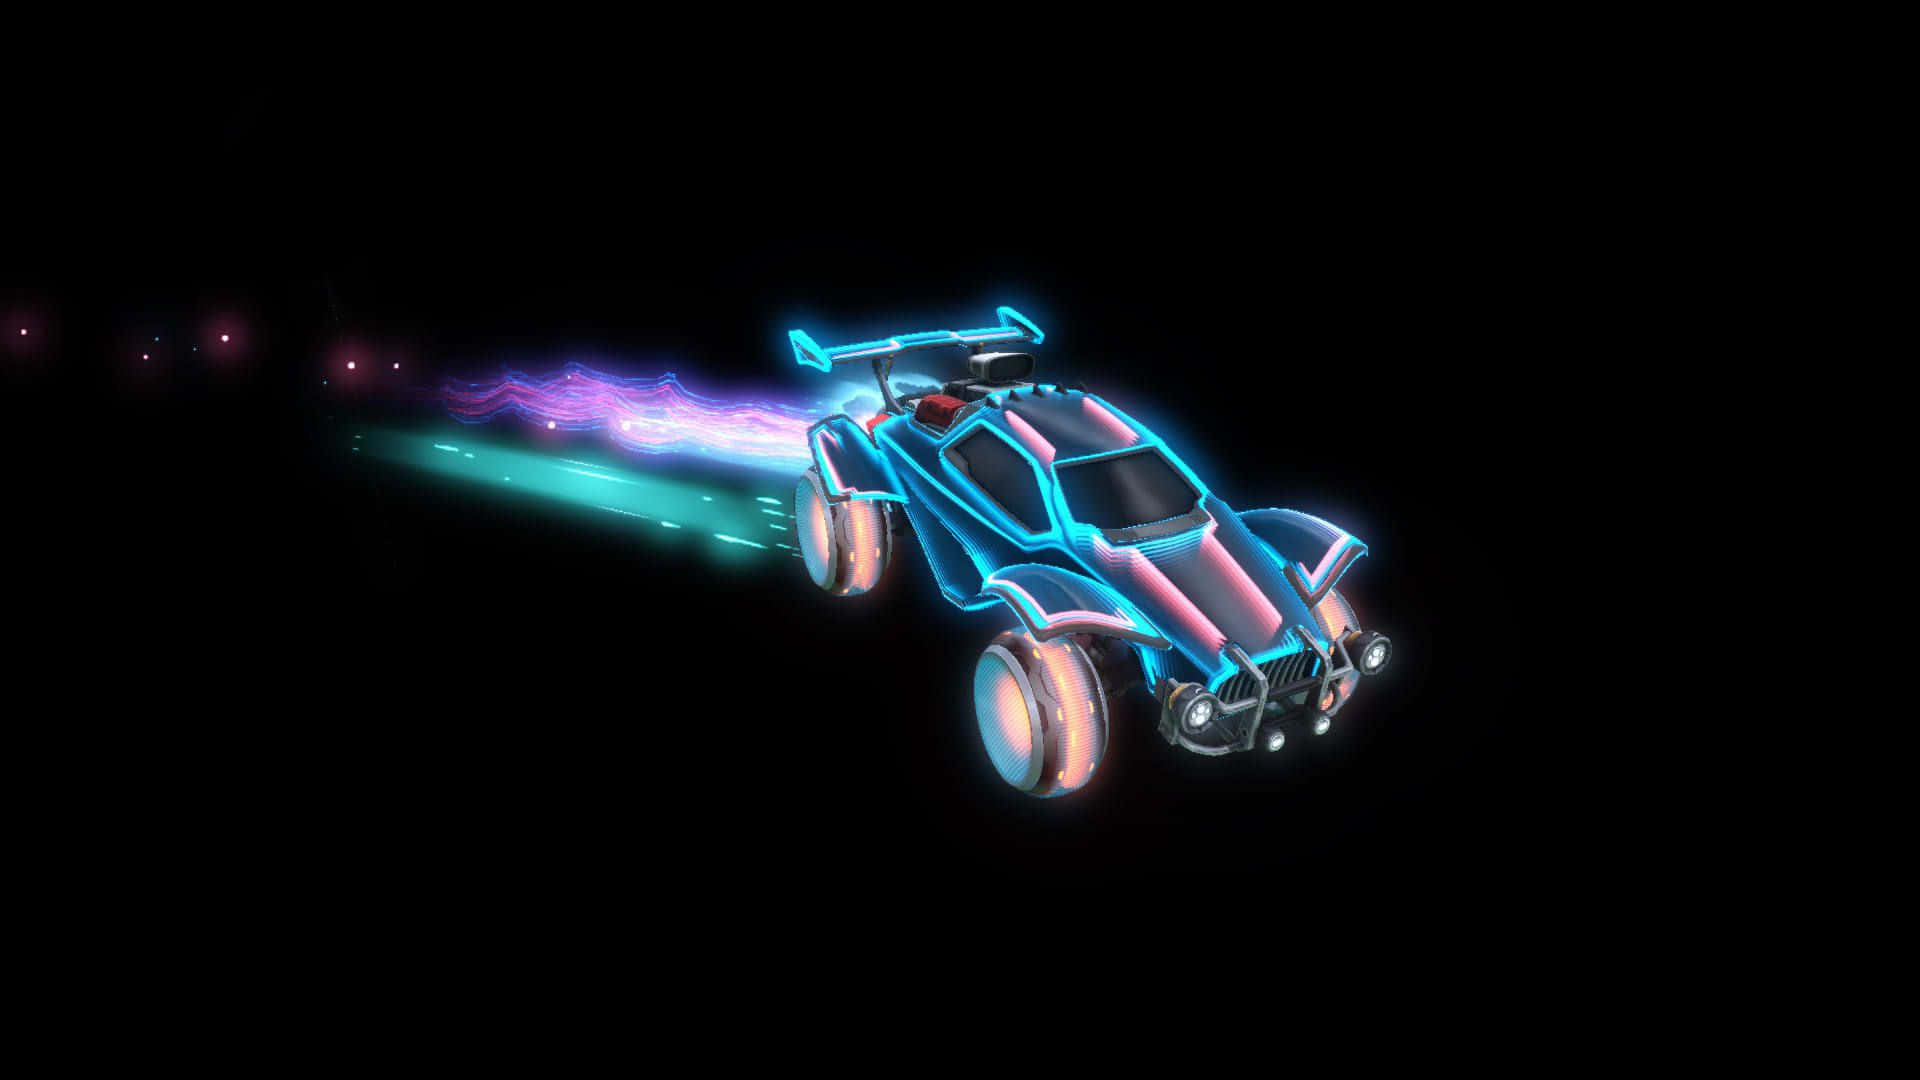 Experience Rocket League Gameplay in High Definition